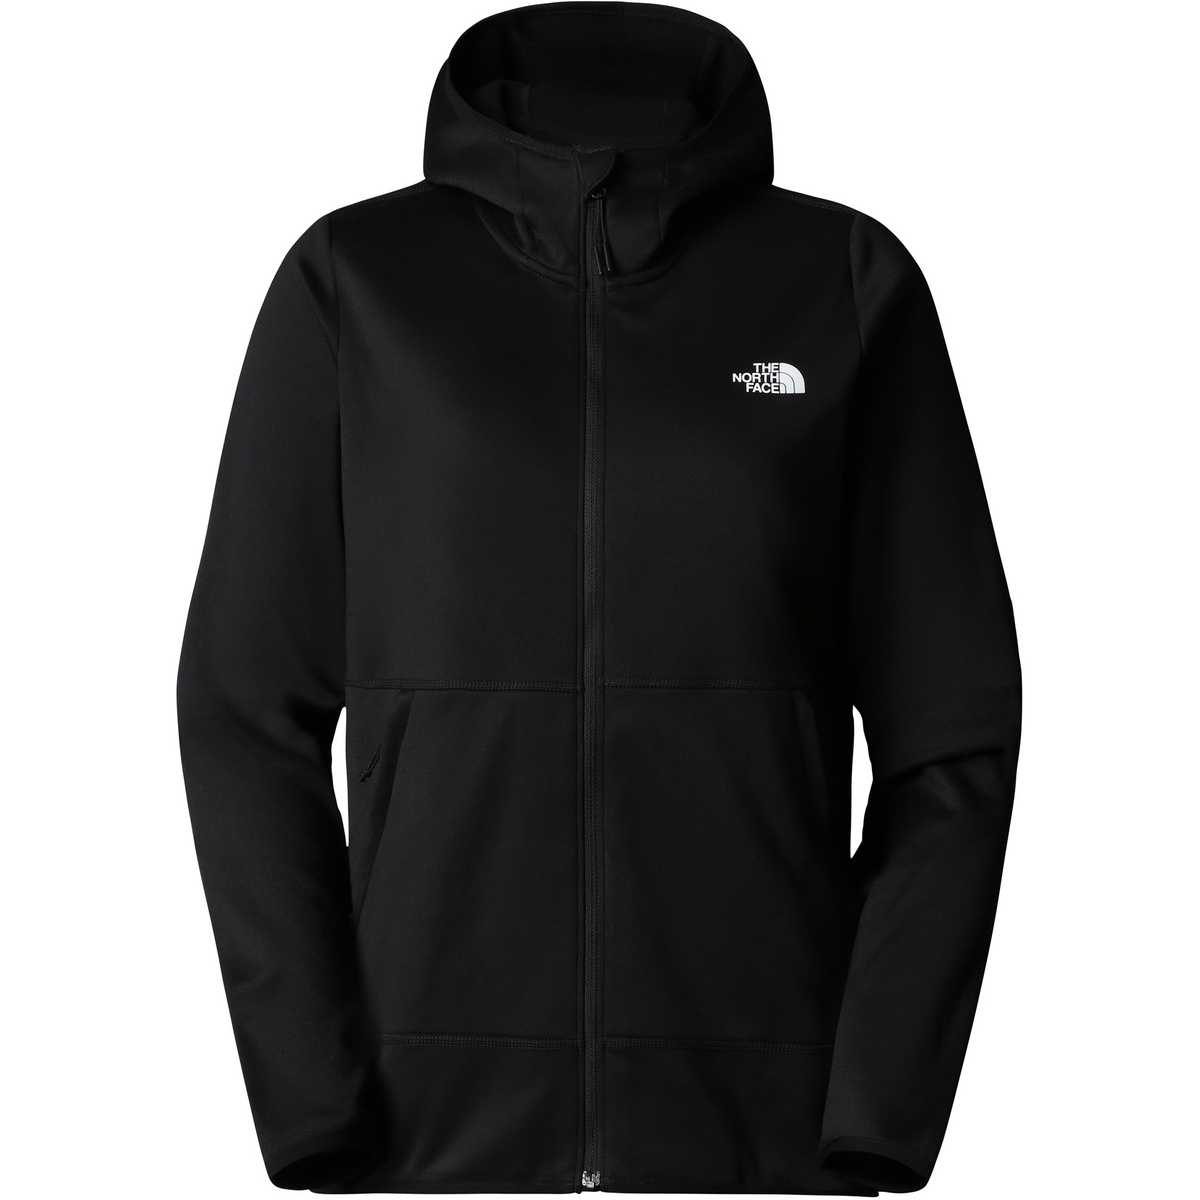 The North Face Damen Canyonlands Hoodie Jacke von The North Face